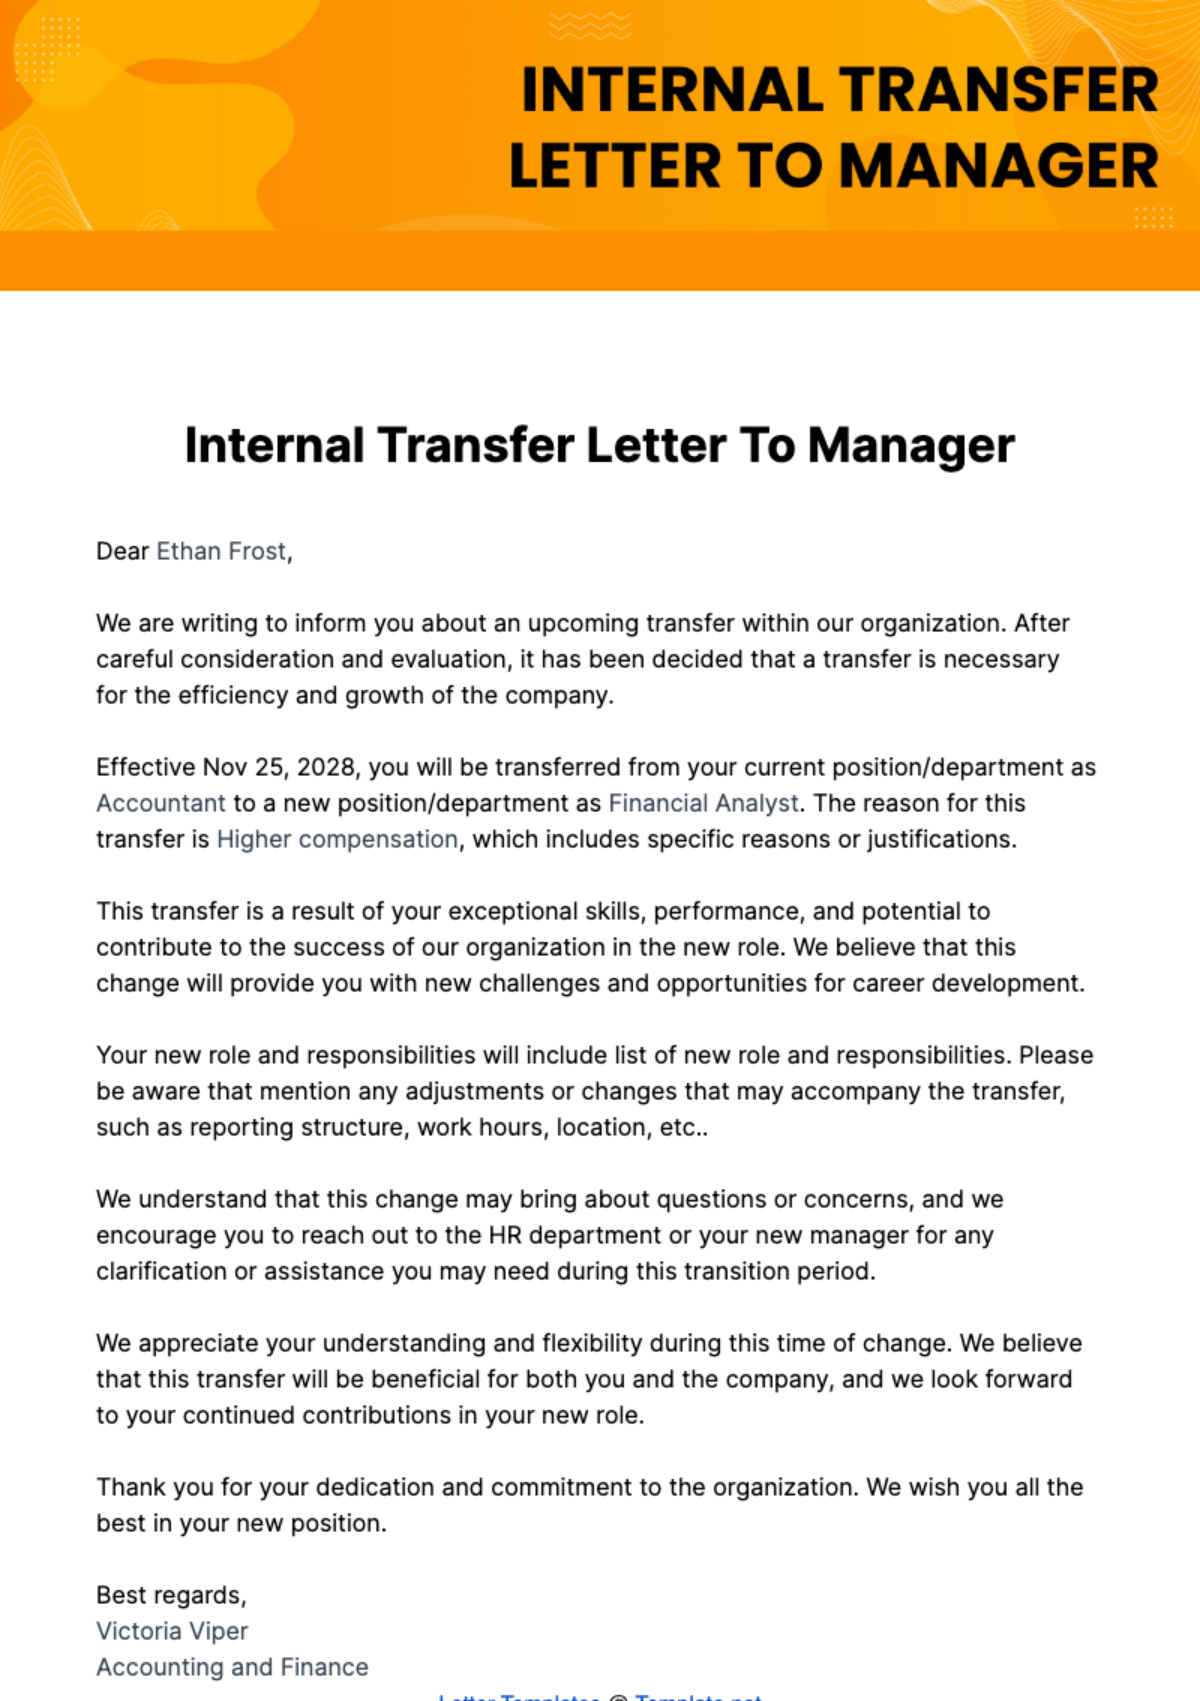 Free Internal Transfer Letter To Manager Template